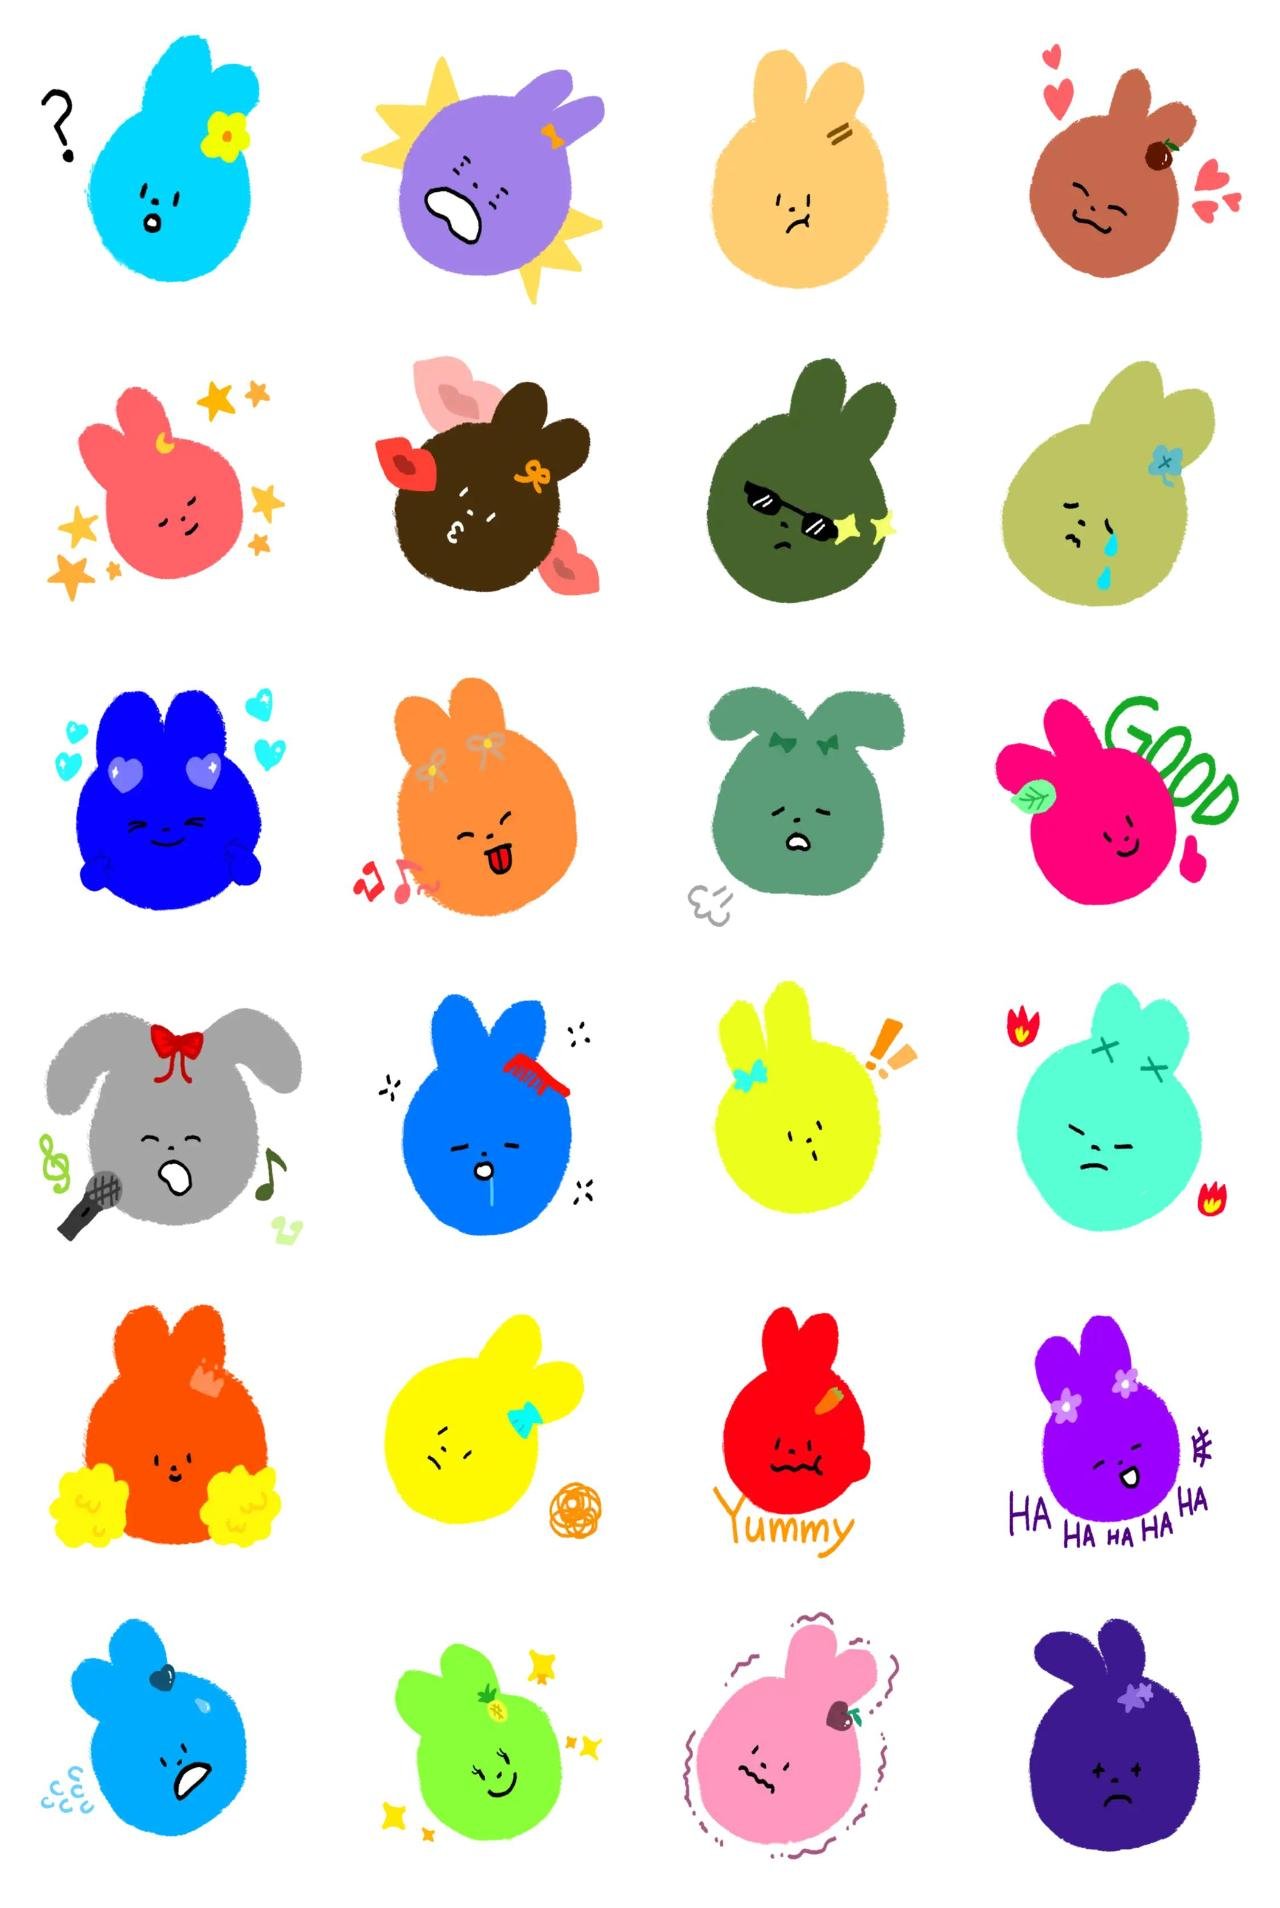 Rabbit's Expression Animals sticker pack for Whatsapp, Telegram, Signal, and others chatting and message apps